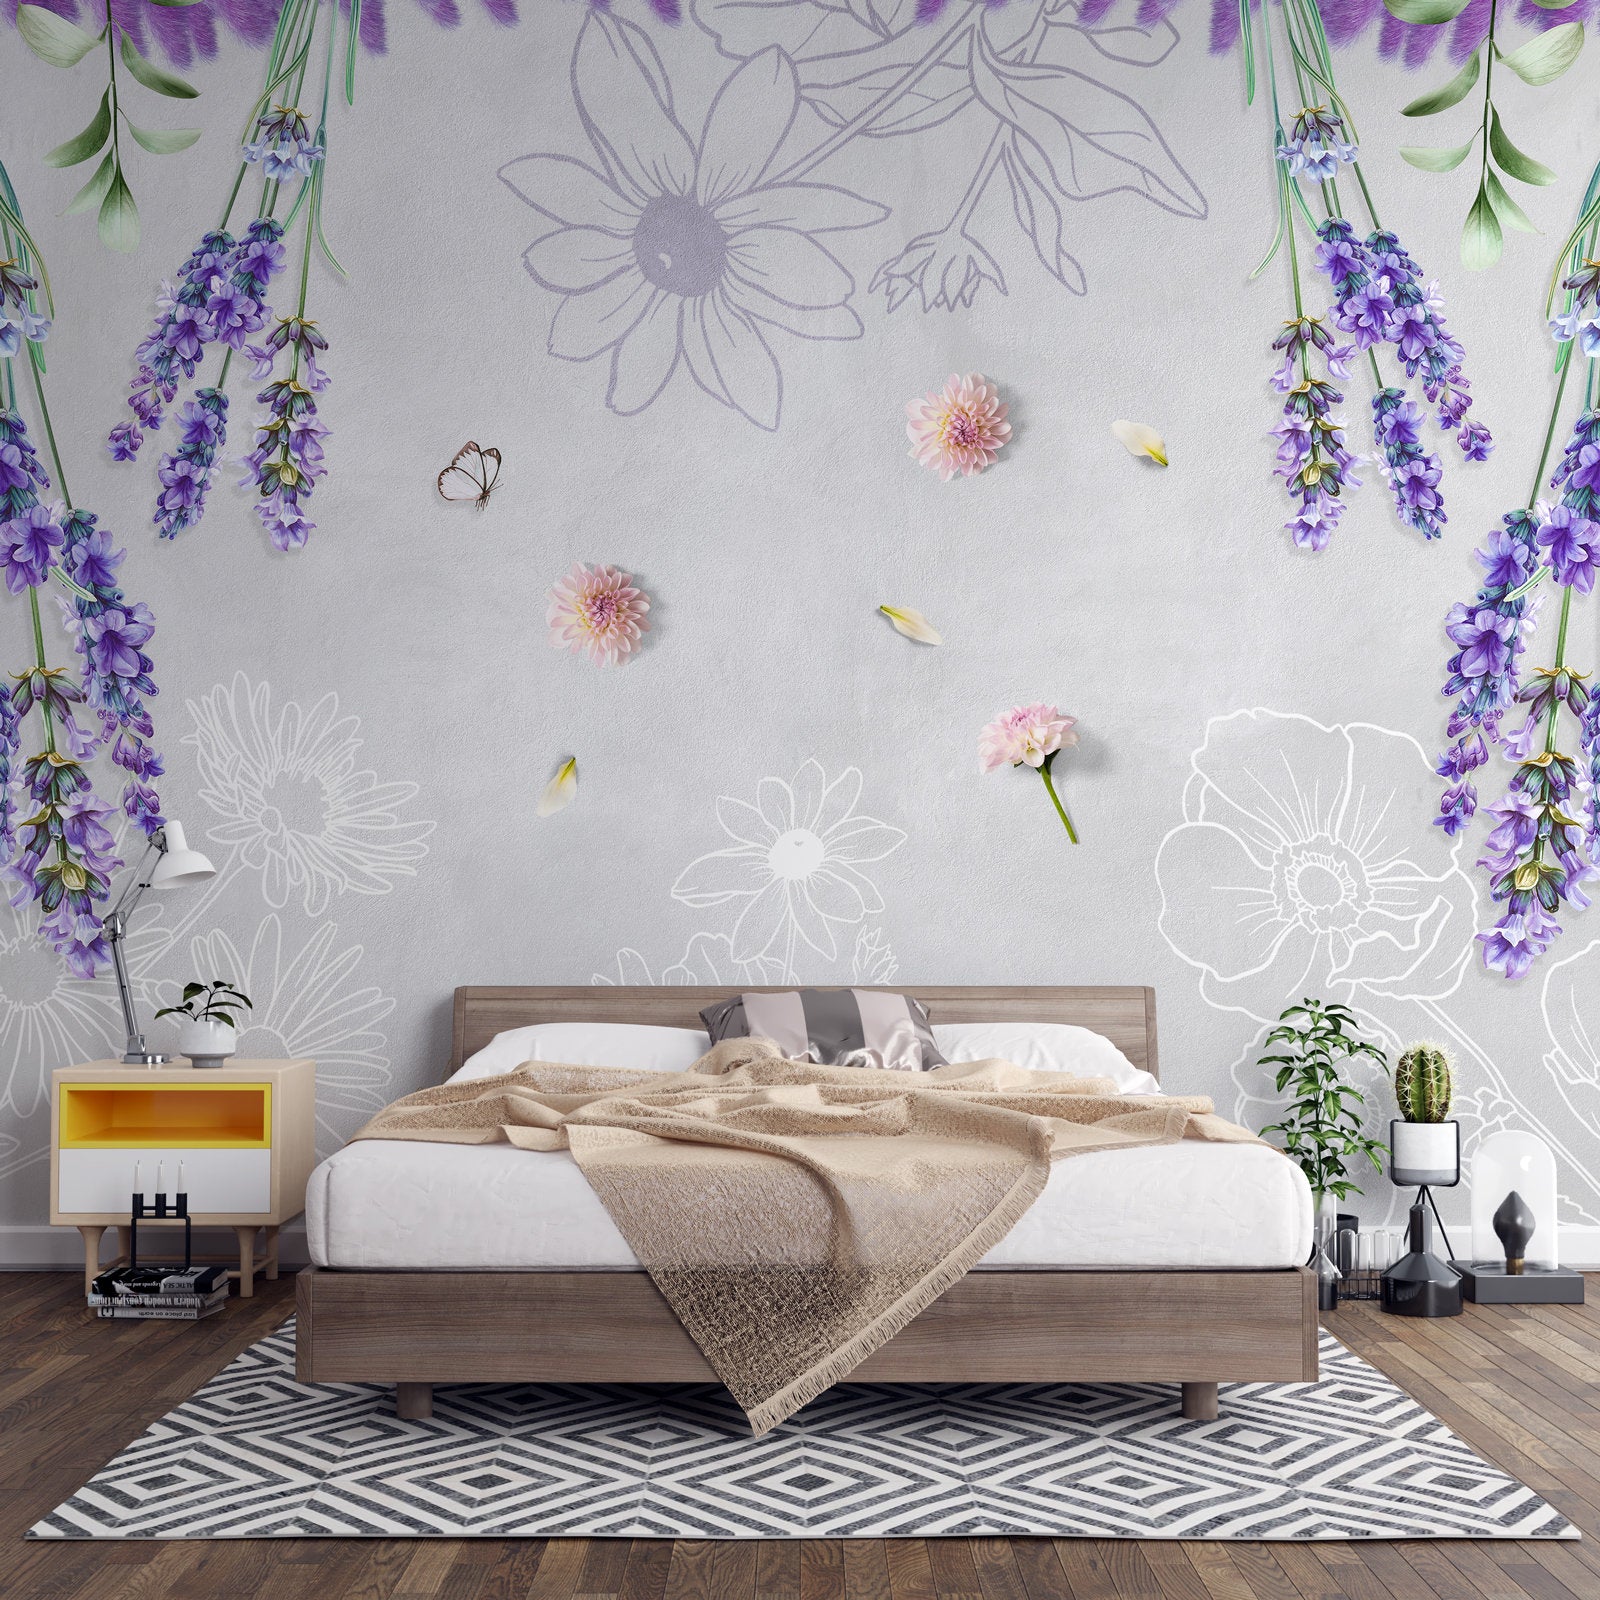 Purplish Bluish Abstract Floral Wallpaper Self Adhesive Peel and Stick Wall Sticker Wall Decoration Removable